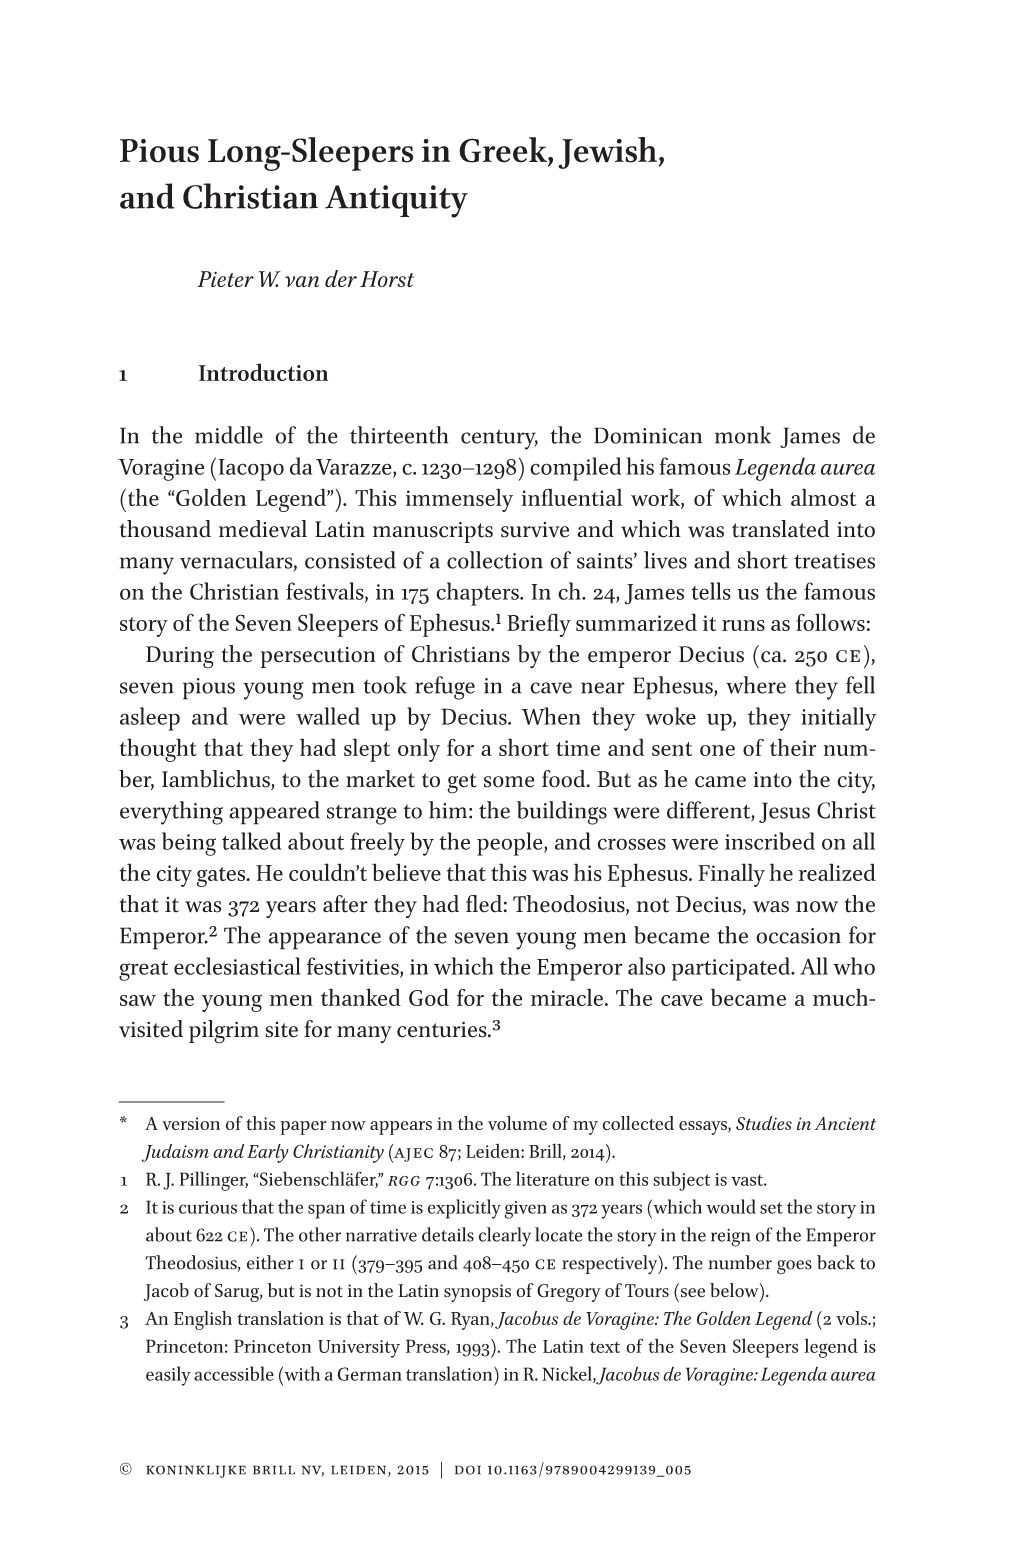 Pious Long-Sleepers in Greek, Jewish, and Christian Antiquity